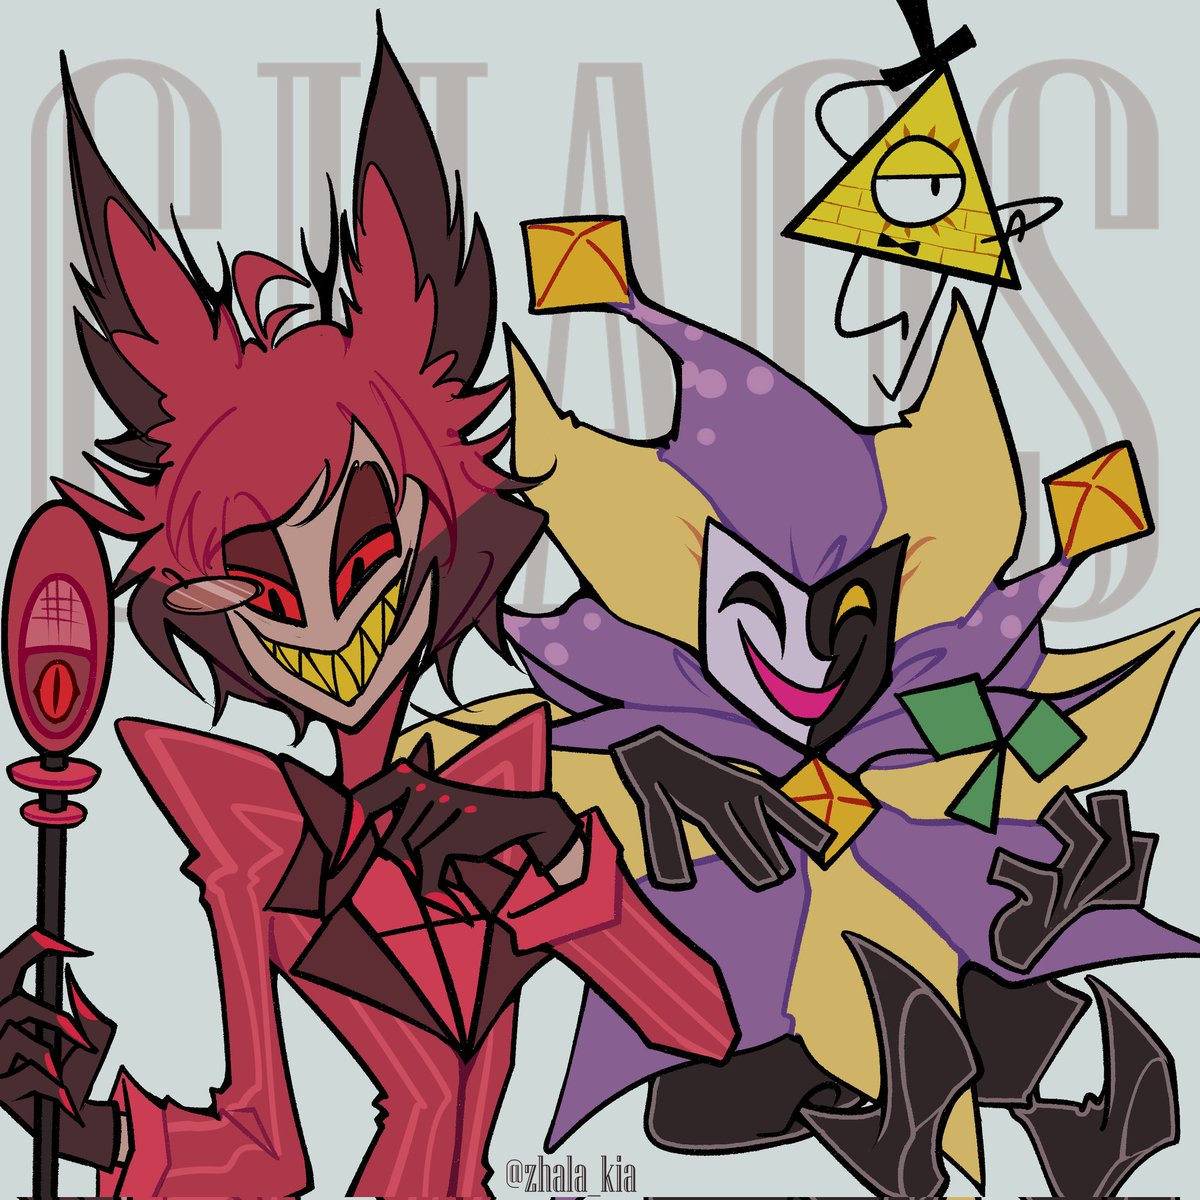 Their commonality is that they do not intend to retire and have the ability to bathe everyone in entertaining fire
#superpapermario #papermario #dimentio #gravityfalls #billchiper #HazbinHotel #Alastor